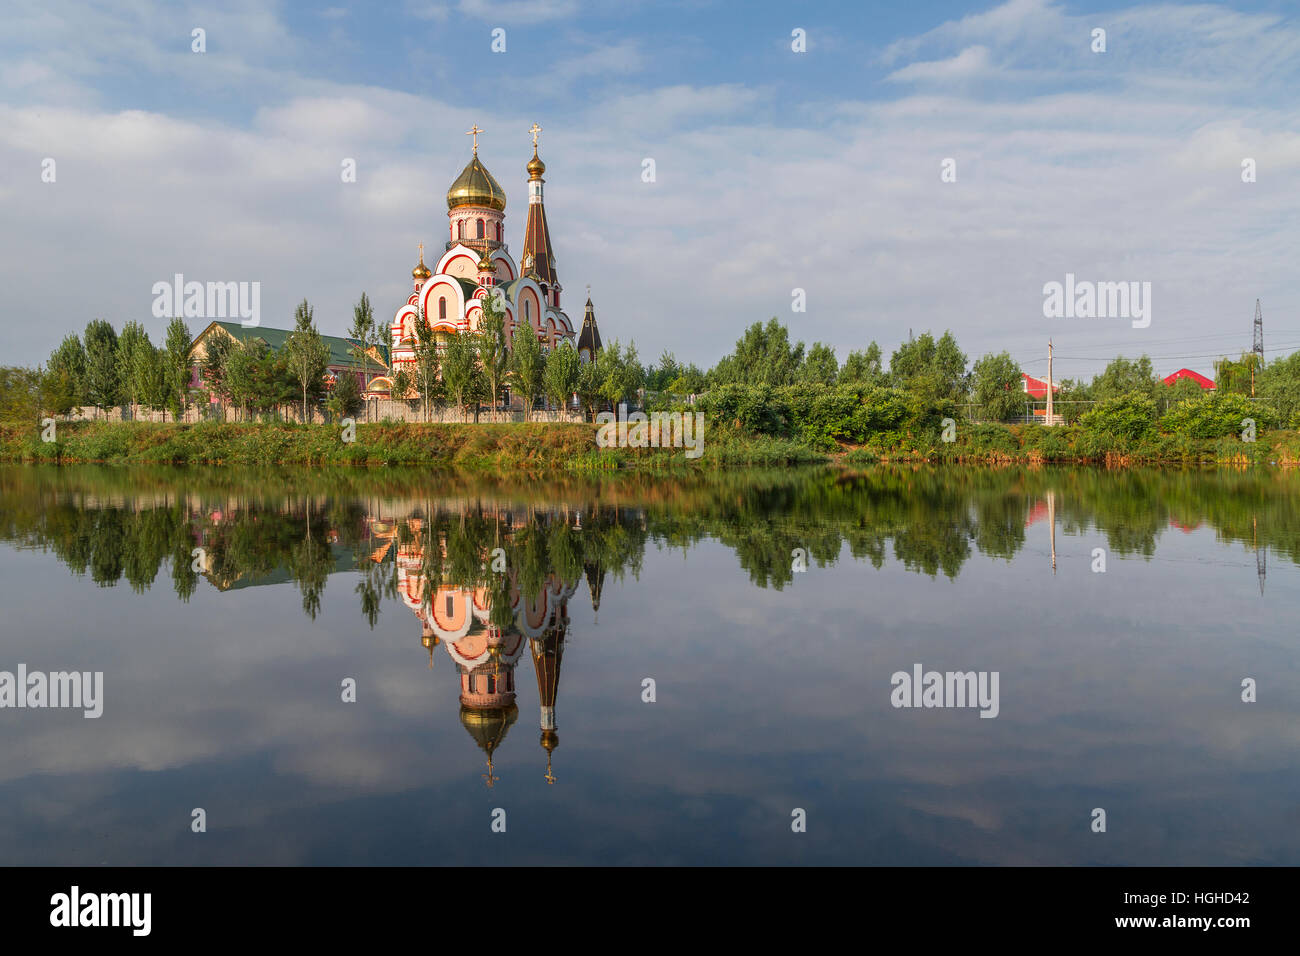 Russian orthodox church in Almaty, Kazakhstan known also as Church of Exaltation of the Holy cross, and its reflection in water. Stock Photo